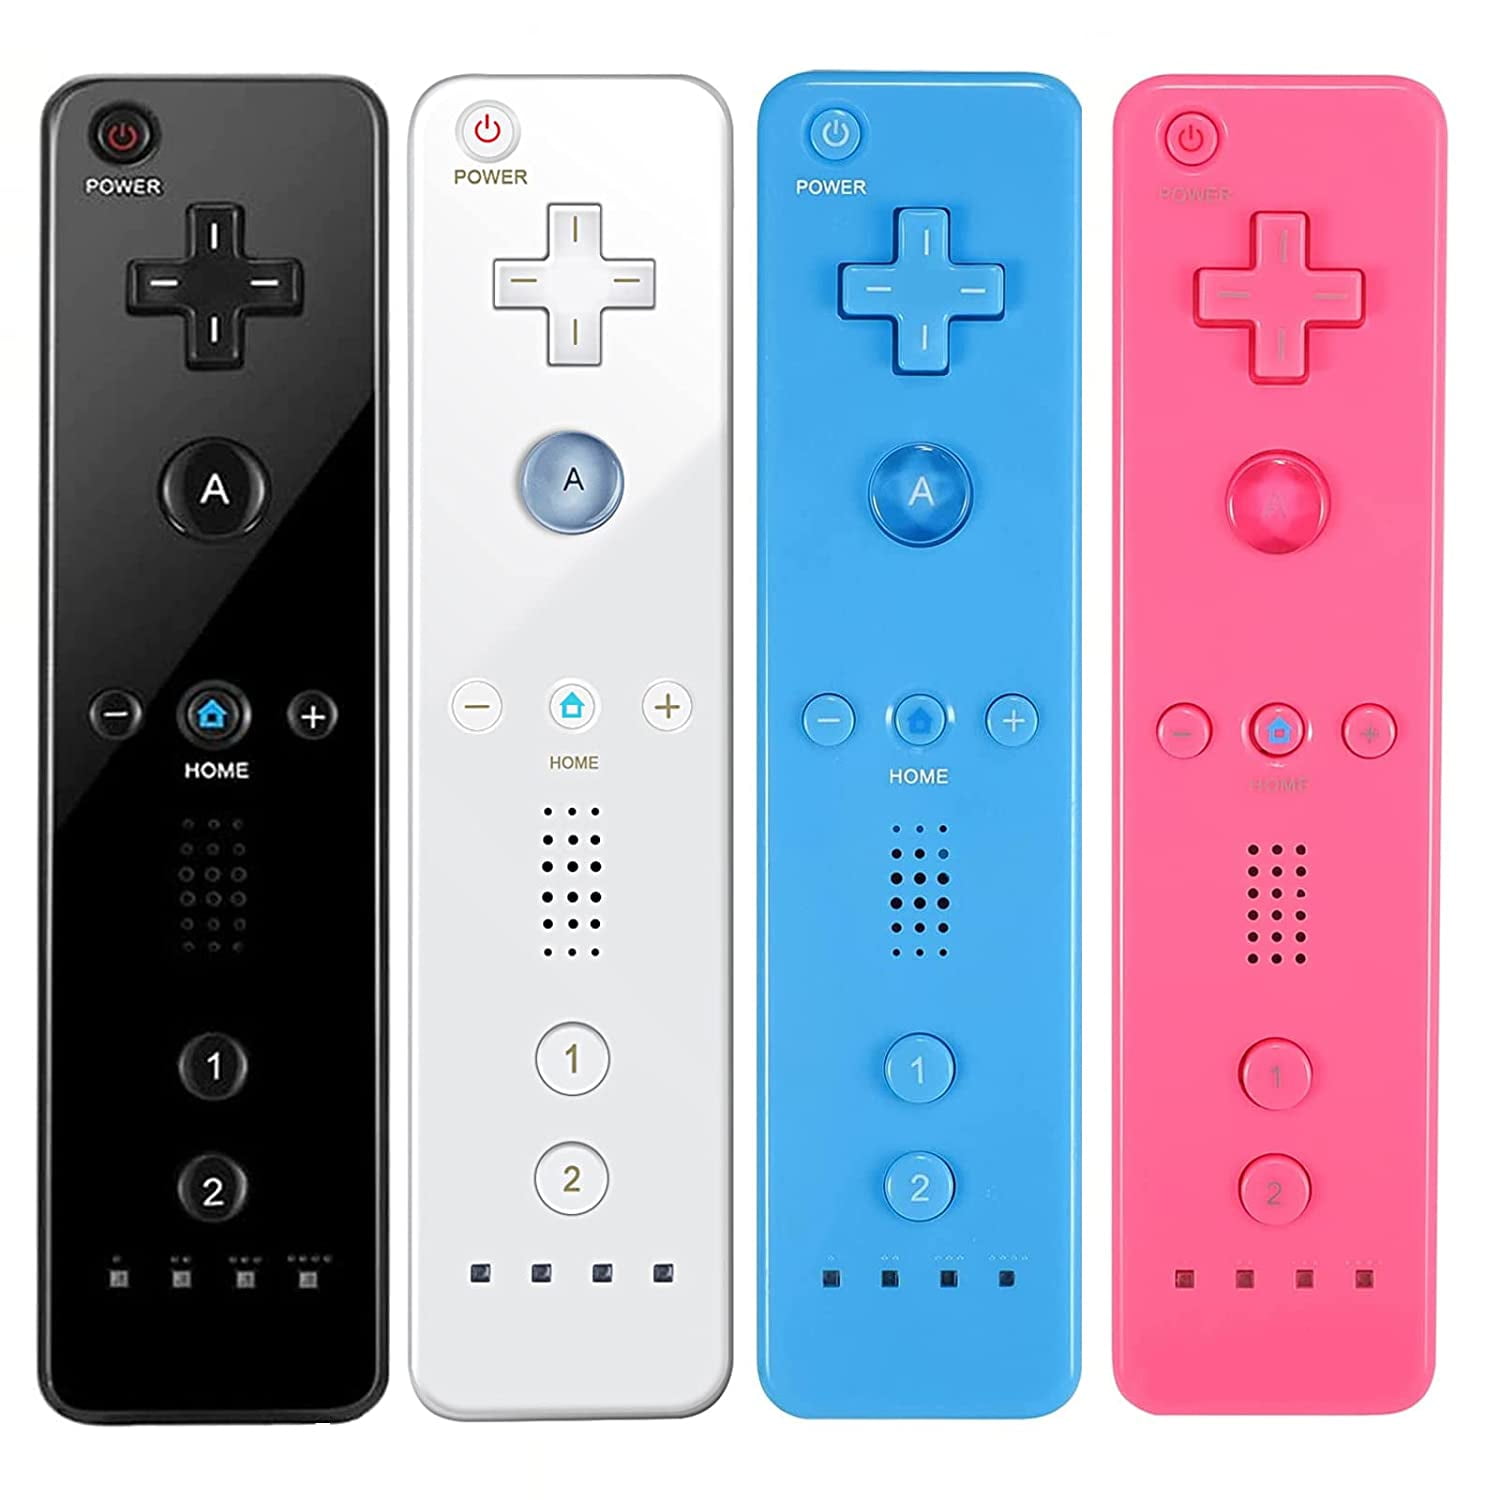 Bonadget 4 Pack Wii Remote Controller, Wii Games Wireless Controller for Nintendo Wii/WIi U Console, Wii Controller Built in 2 in 1 Motion Plus with Case & Wrist Strap